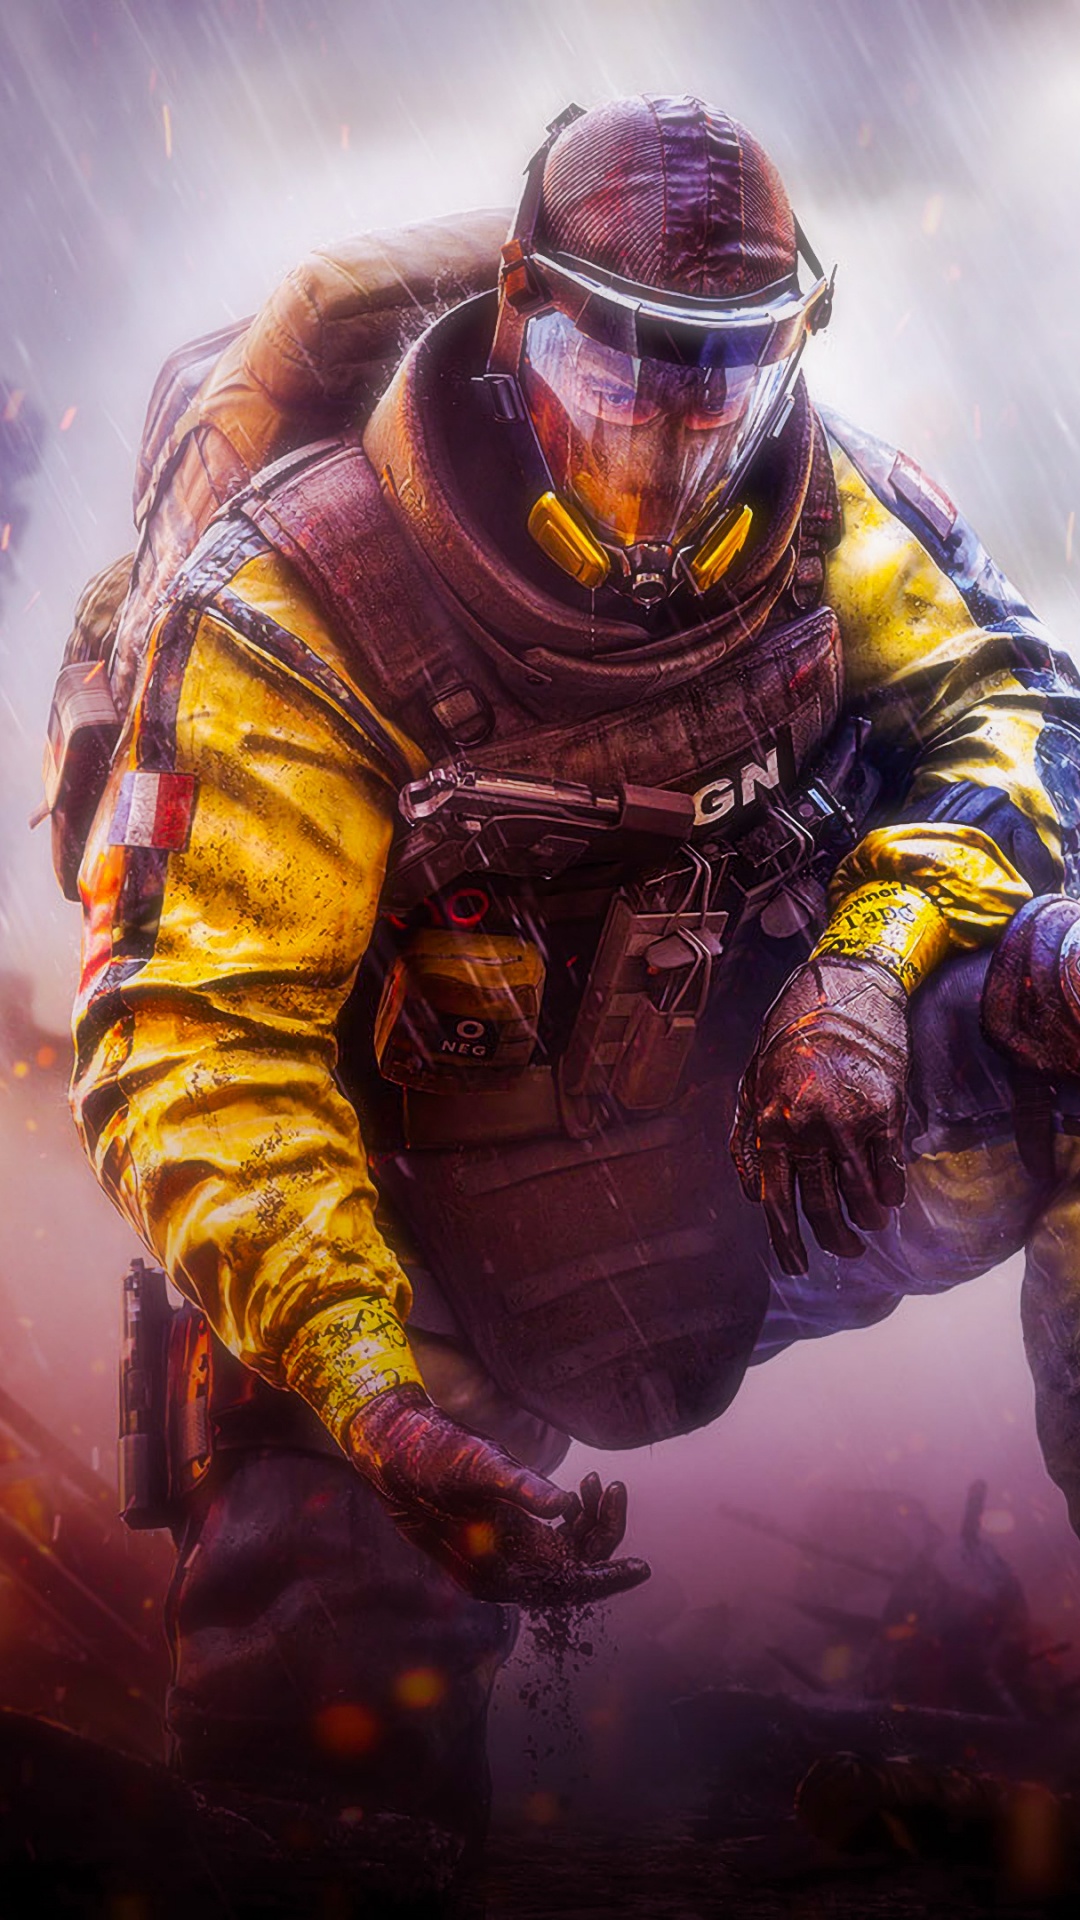 Tom Clancys Rainbow Six, Tactical Shooter, Ubisoft, Firefighter, Illustration. Wallpaper in 1080x1920 Resolution